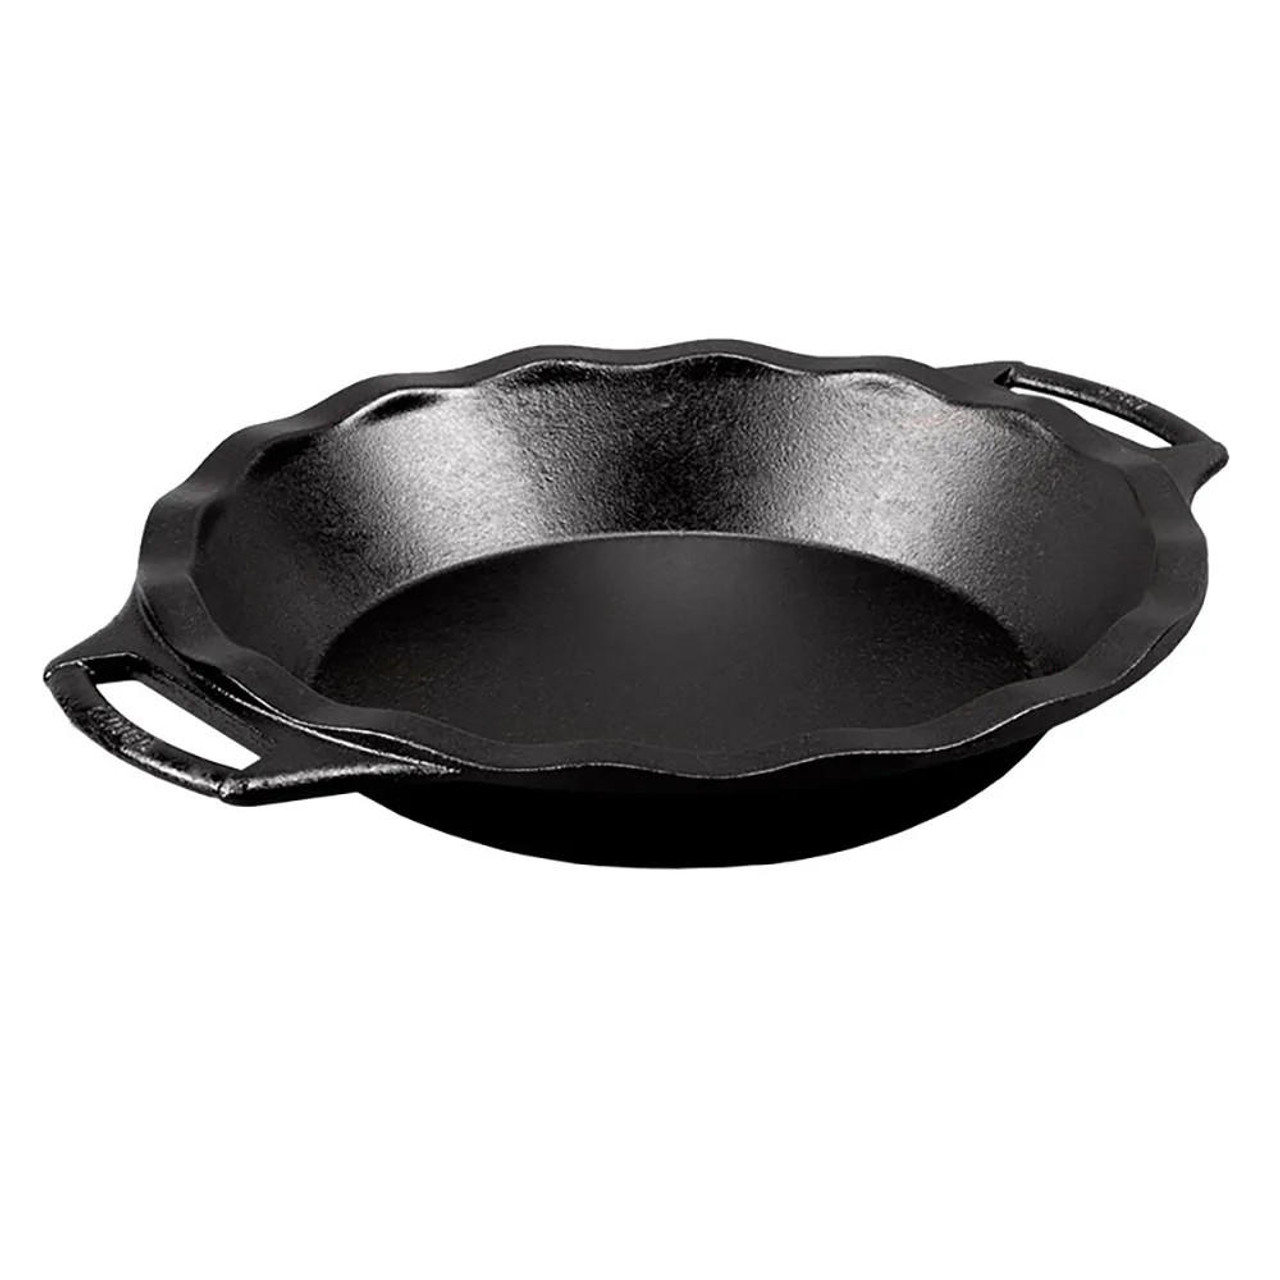 LODGE Lodge Baker's Favorites Set with (3) Pans & Silicone Grips, Cast Iron for Baking 